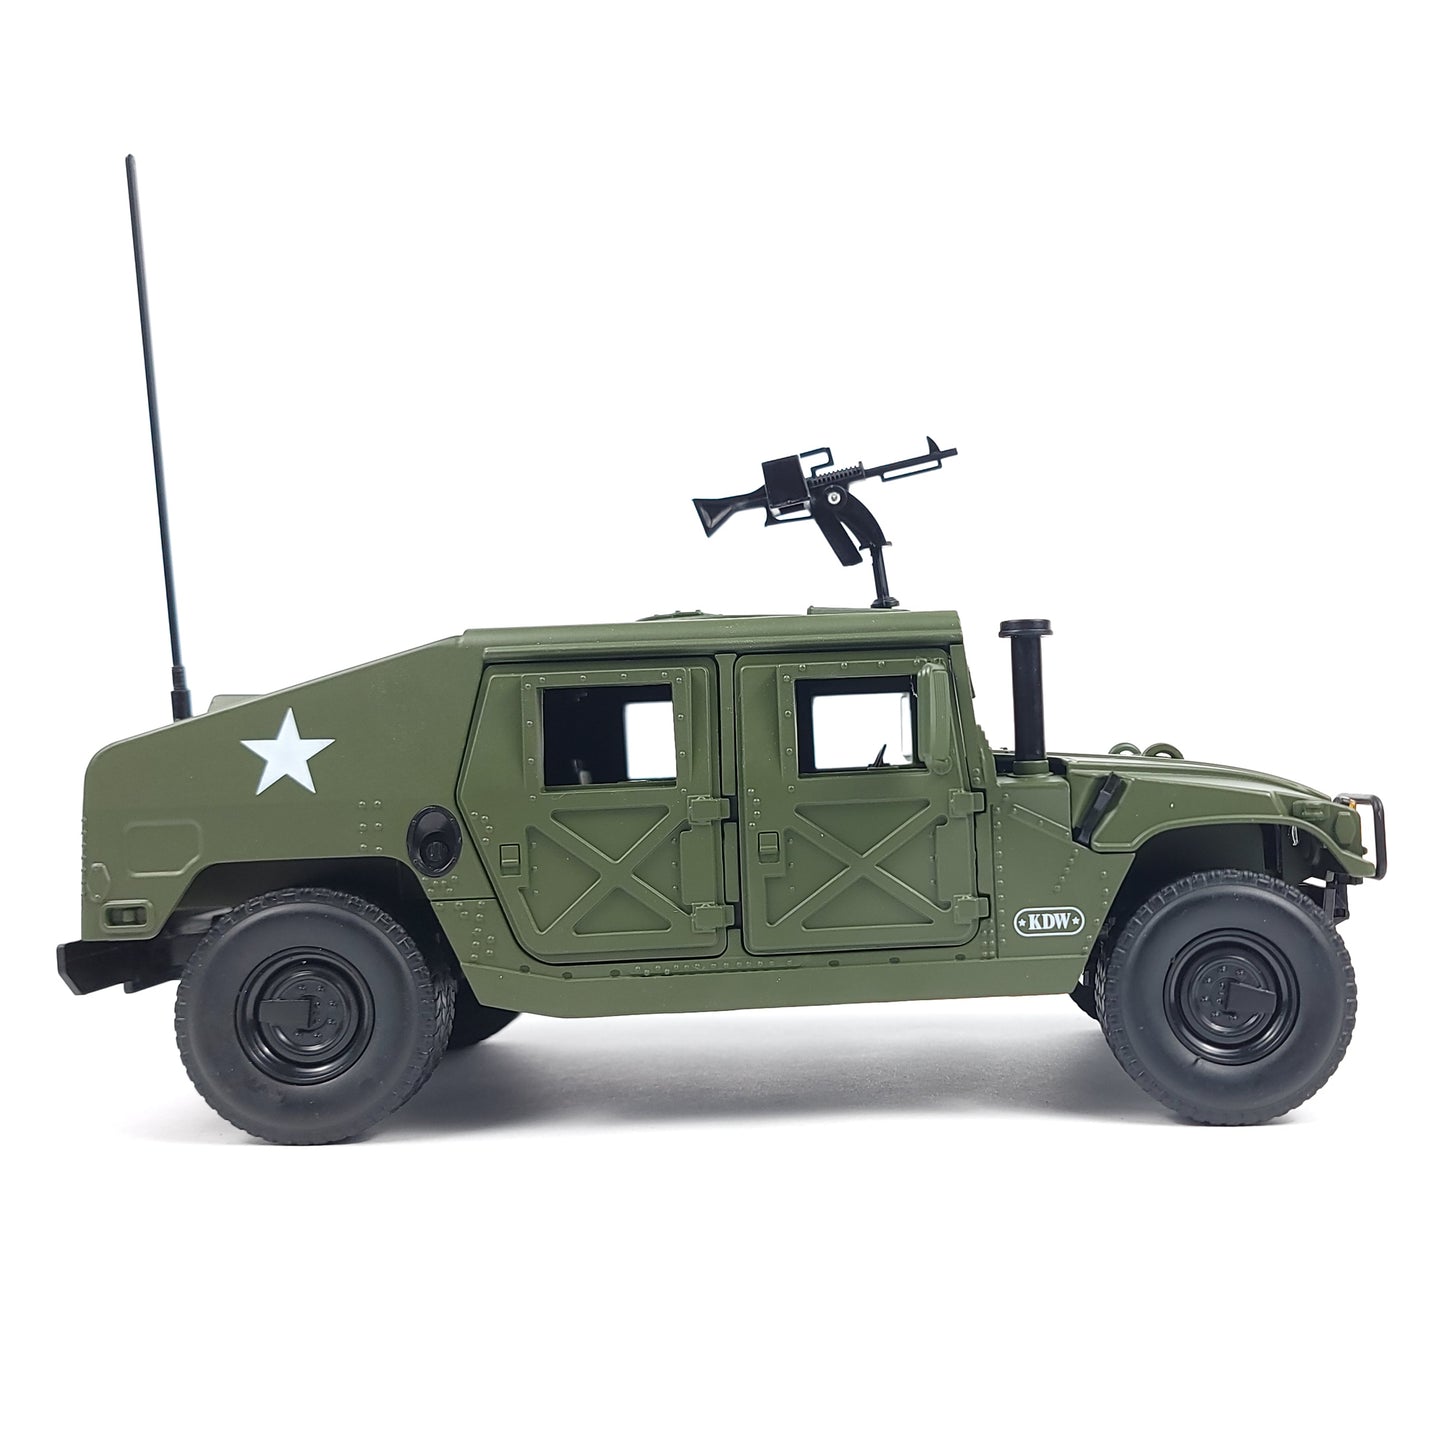 1:18 Scale Hummer H1 Model Car Metal Diecast Military Armored Vehicle Battlefield Truck Model Toy Collection Gift